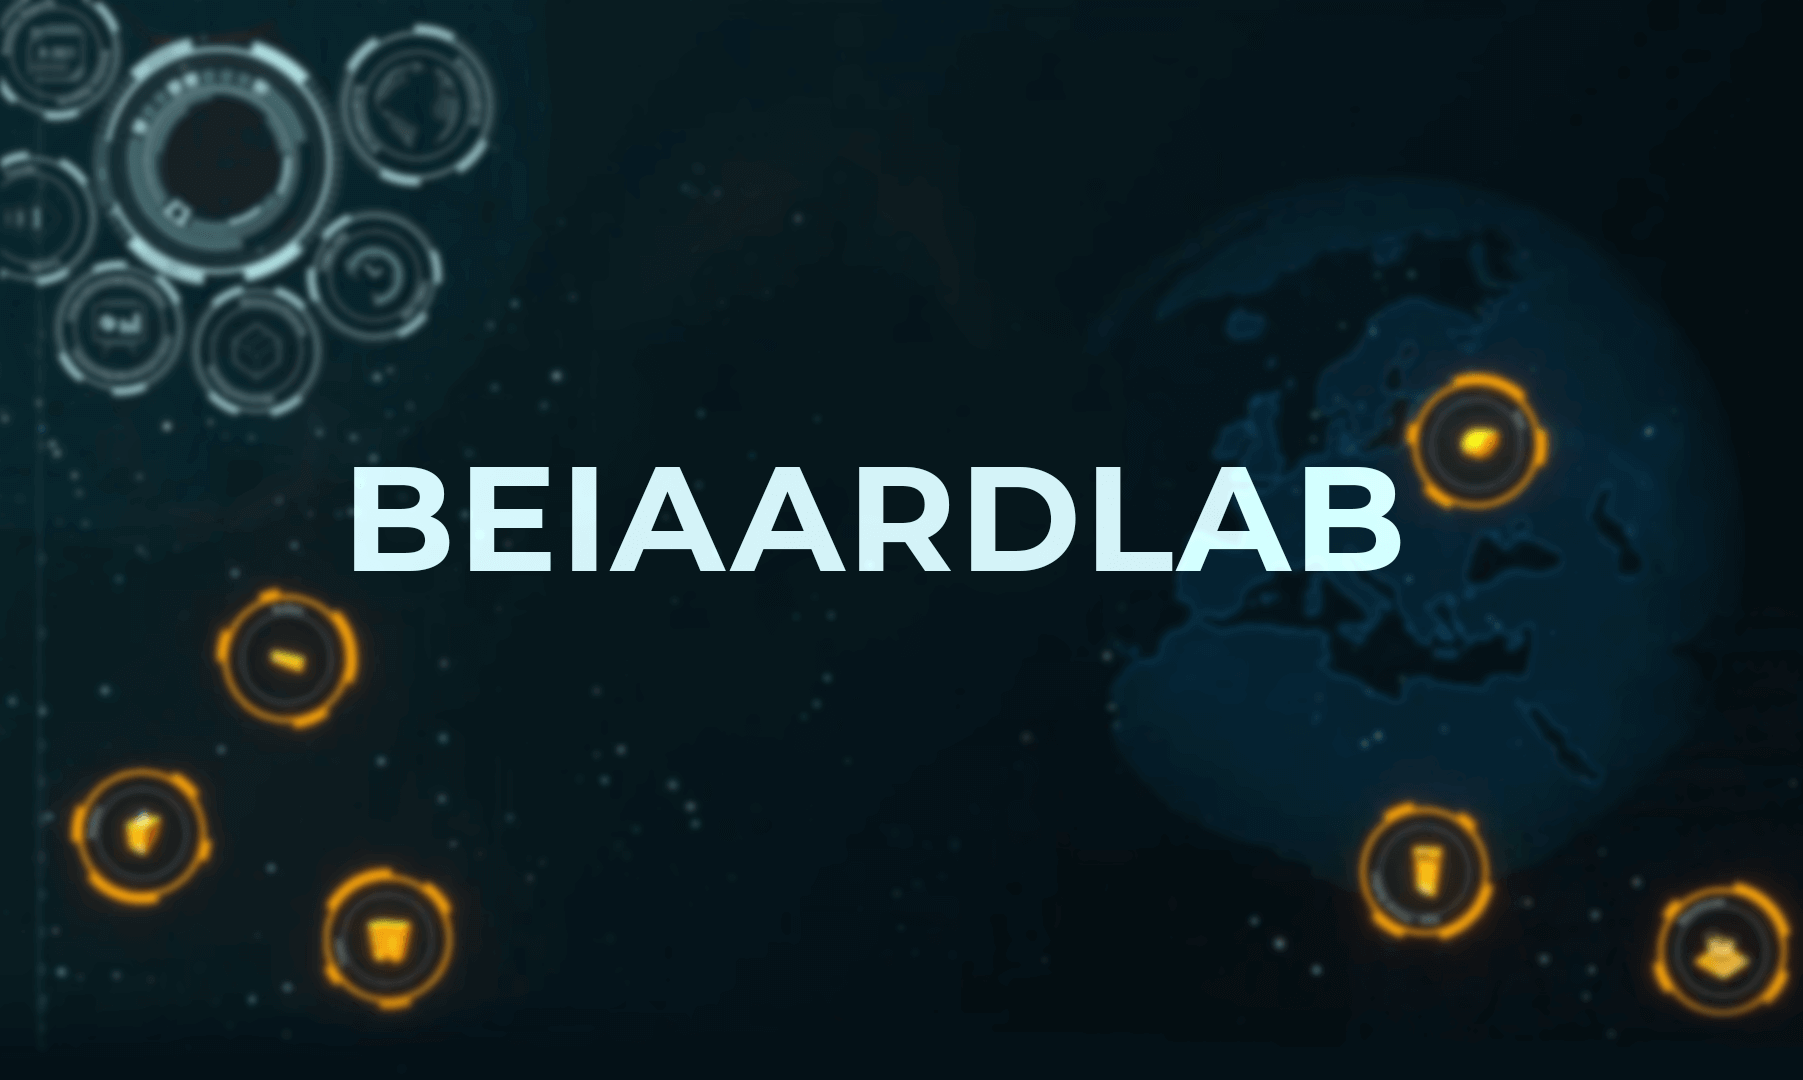 Beiaardlab is a consultancy company for electronics, software and artificial intelligence.